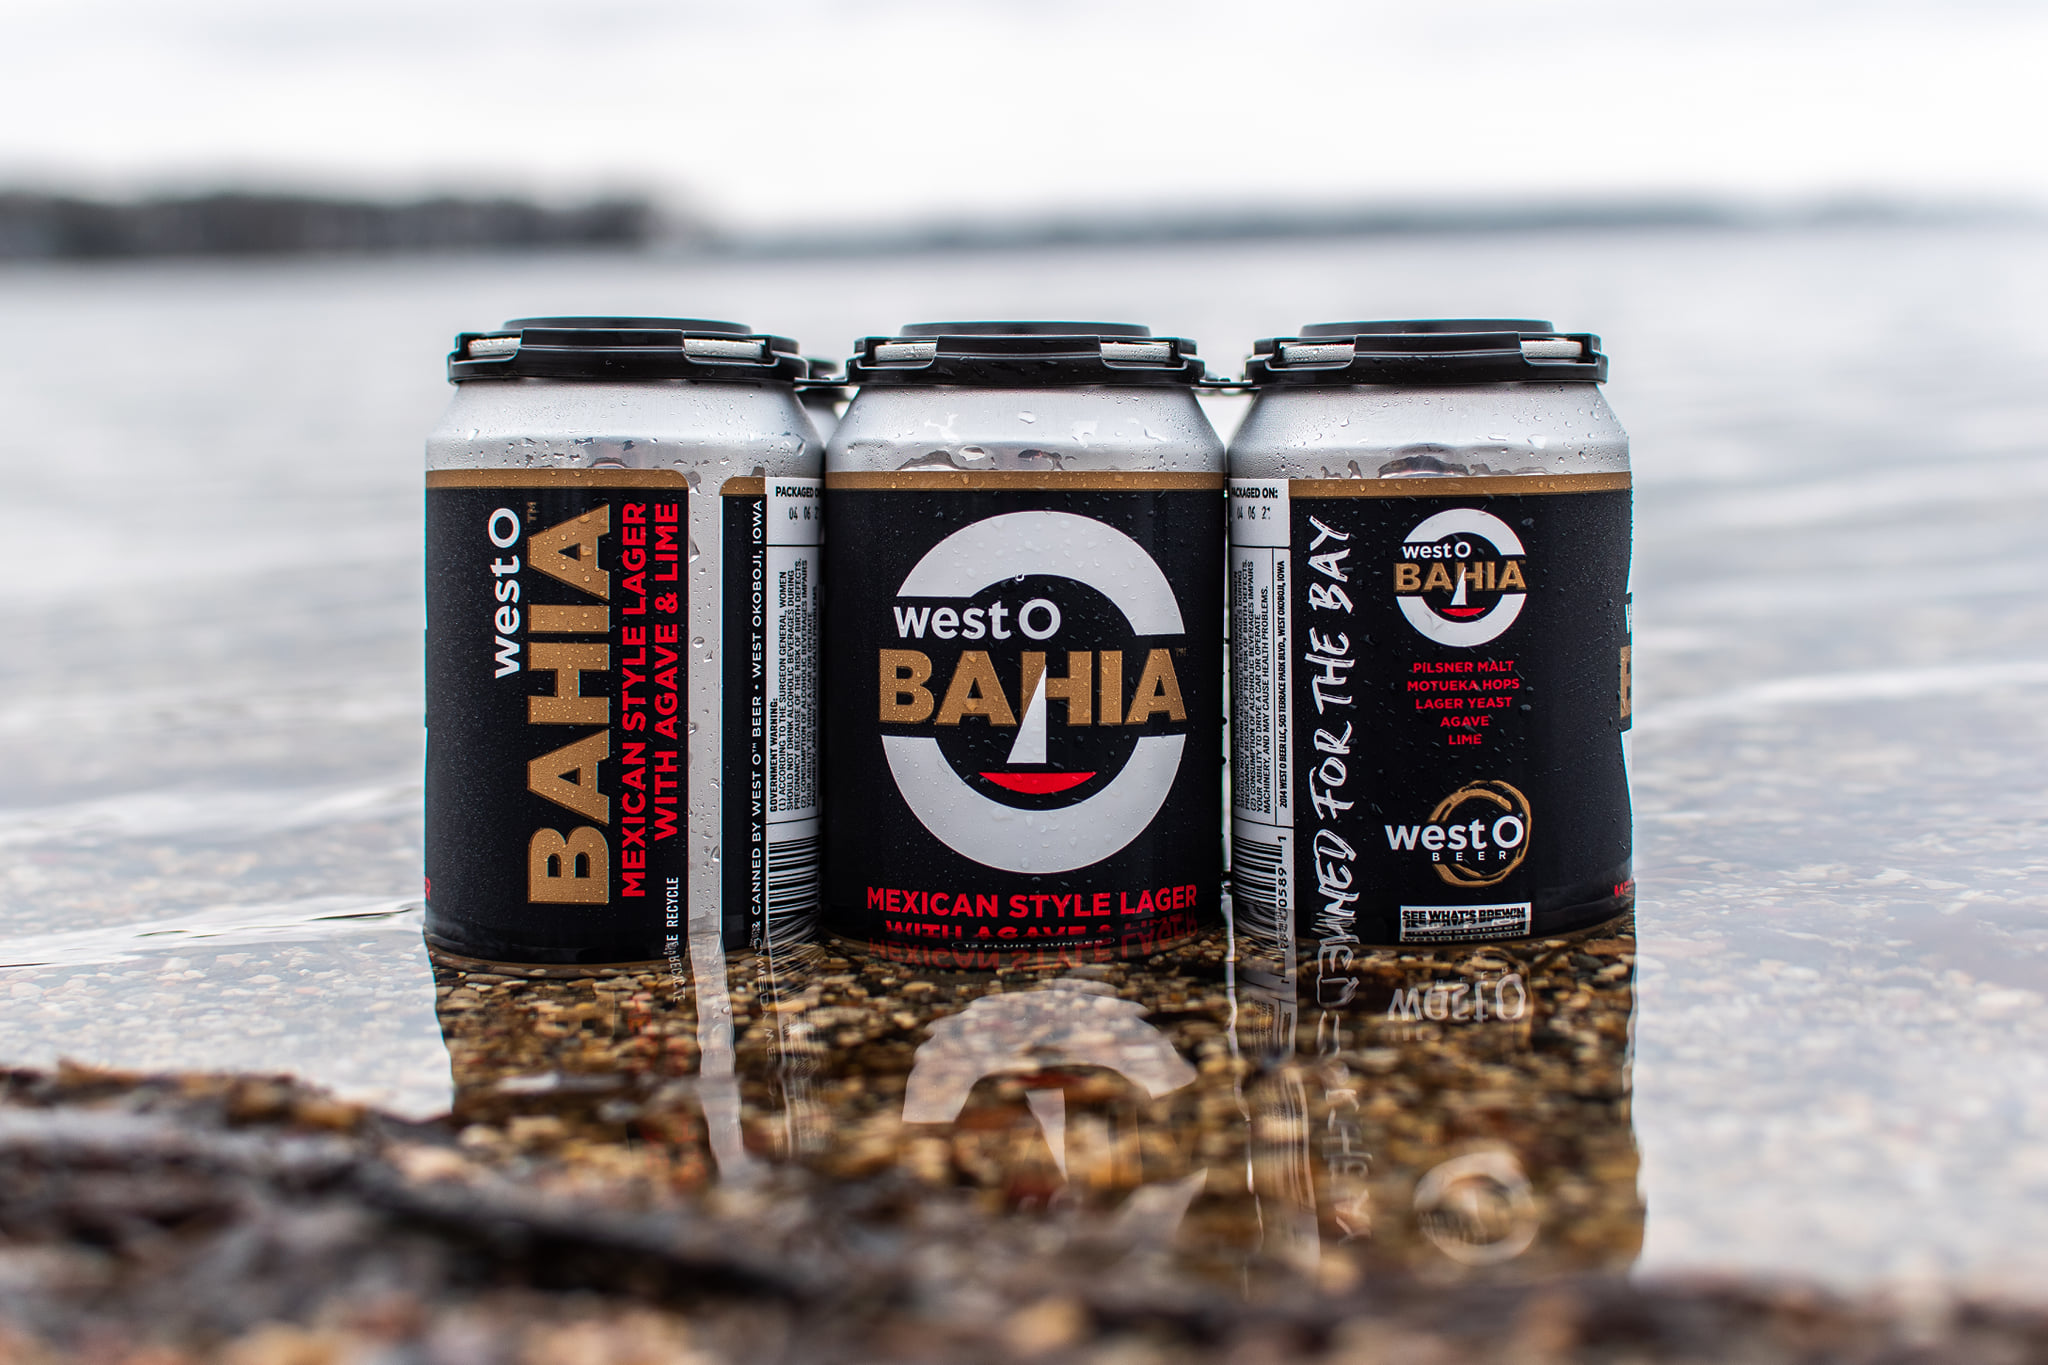 West O Bahia - Canned For The Bay